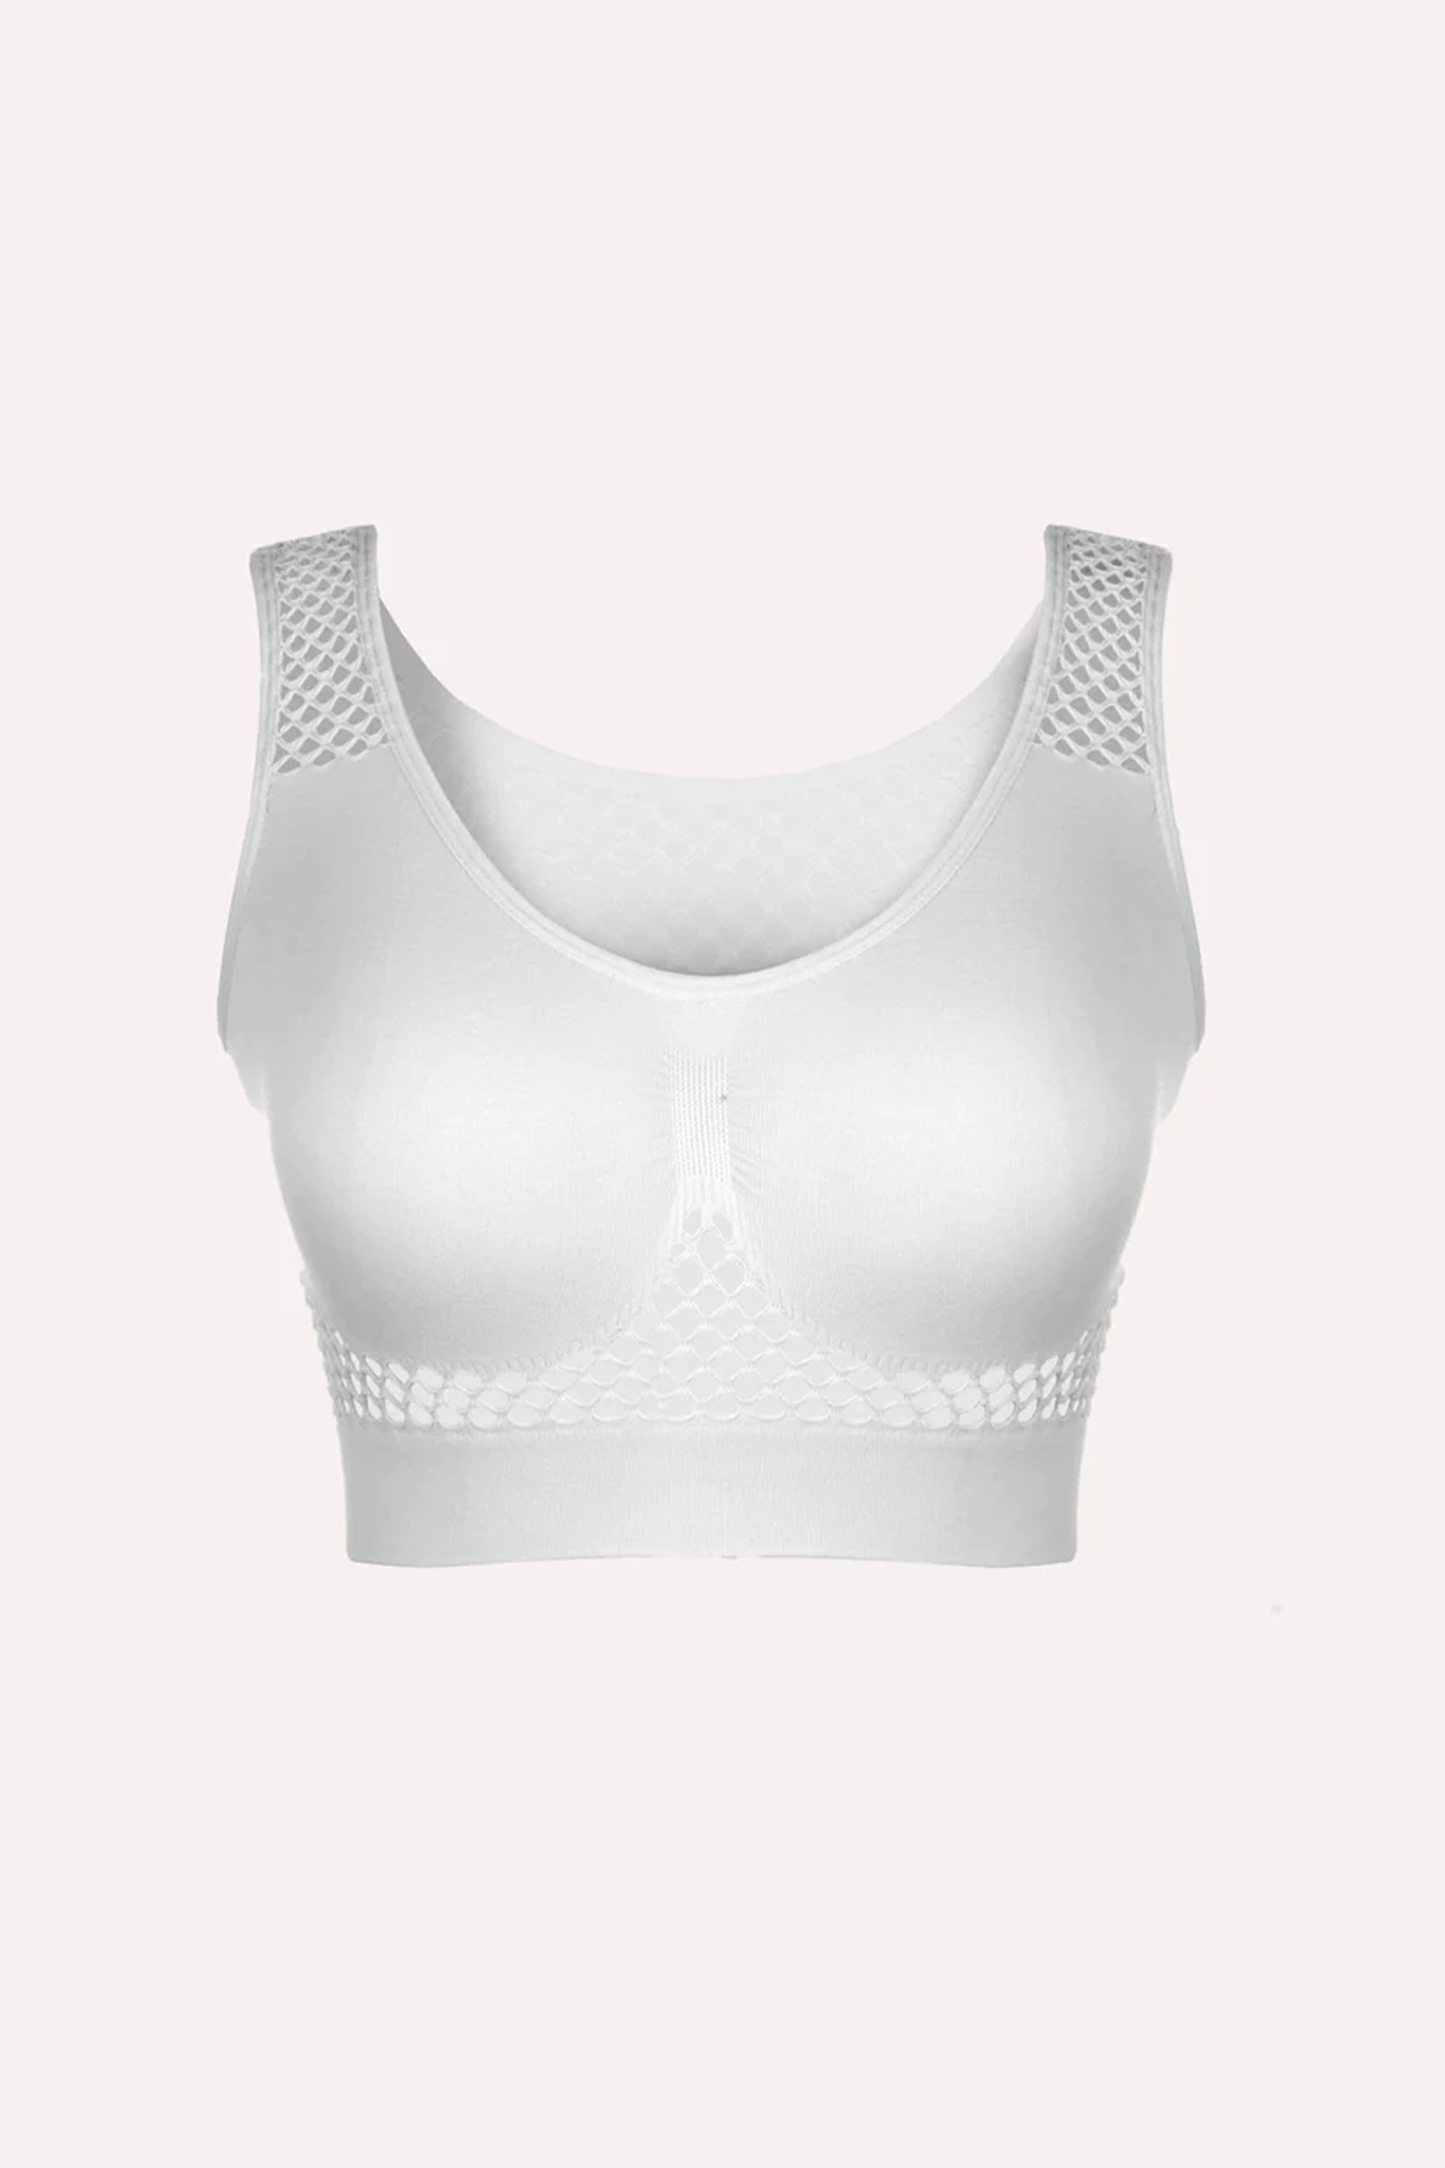 emprotred semless Plain semlees sport bra only wholesele rs 120, For Inner  Wear, Size: free at Rs 120/piece in Surat